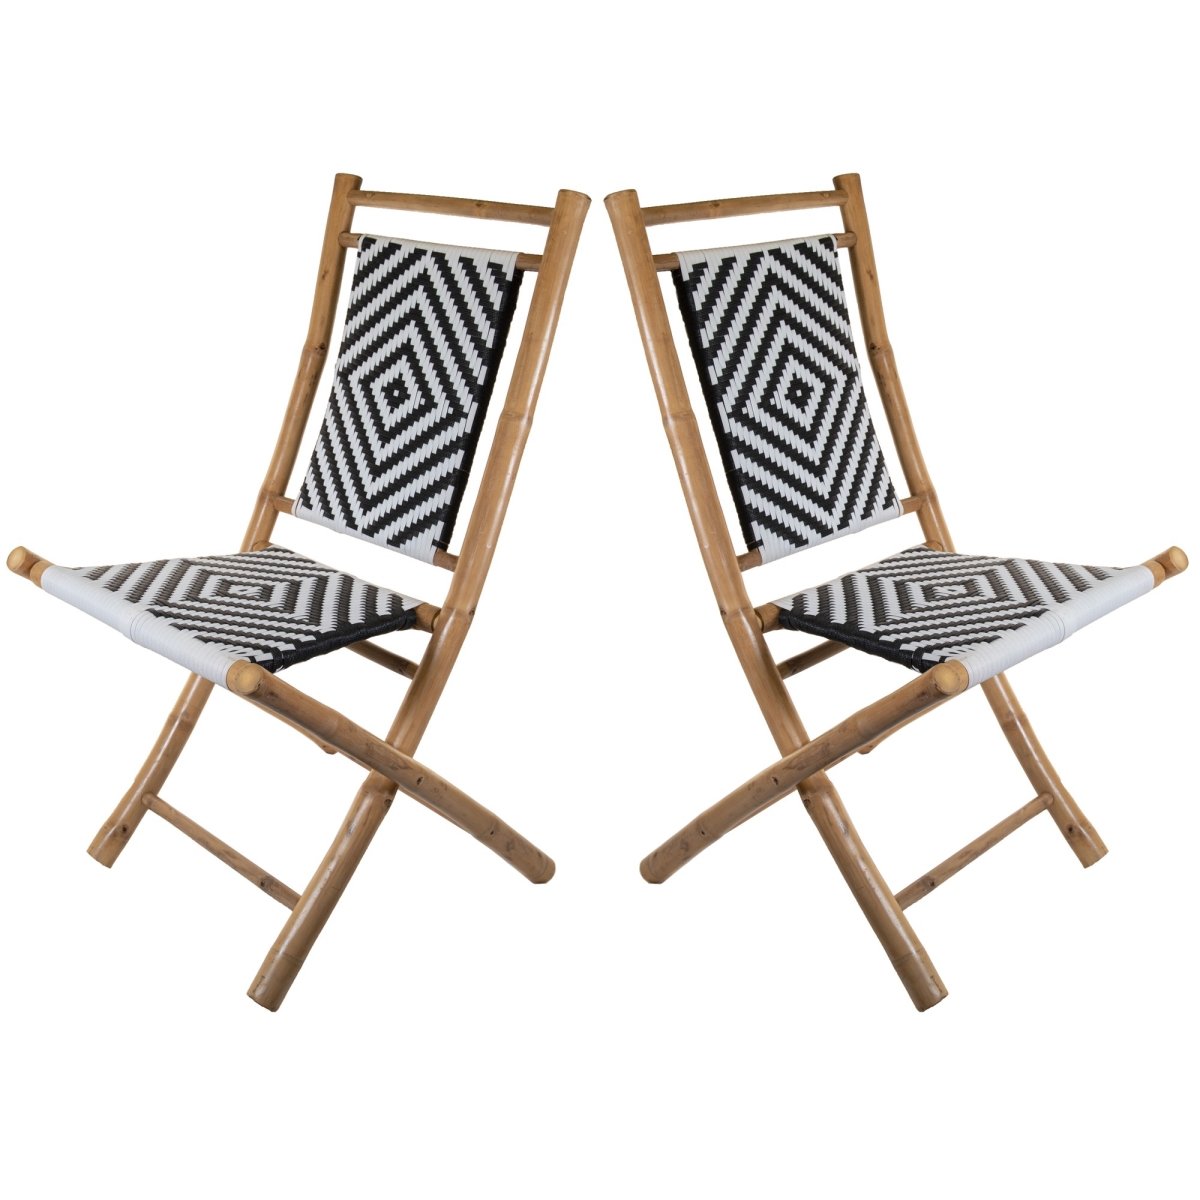 Home Roots 383049 Foldable Armless Chairs In Solid Bamboo Frame With Blue & White Woven Seat, Set Of 2